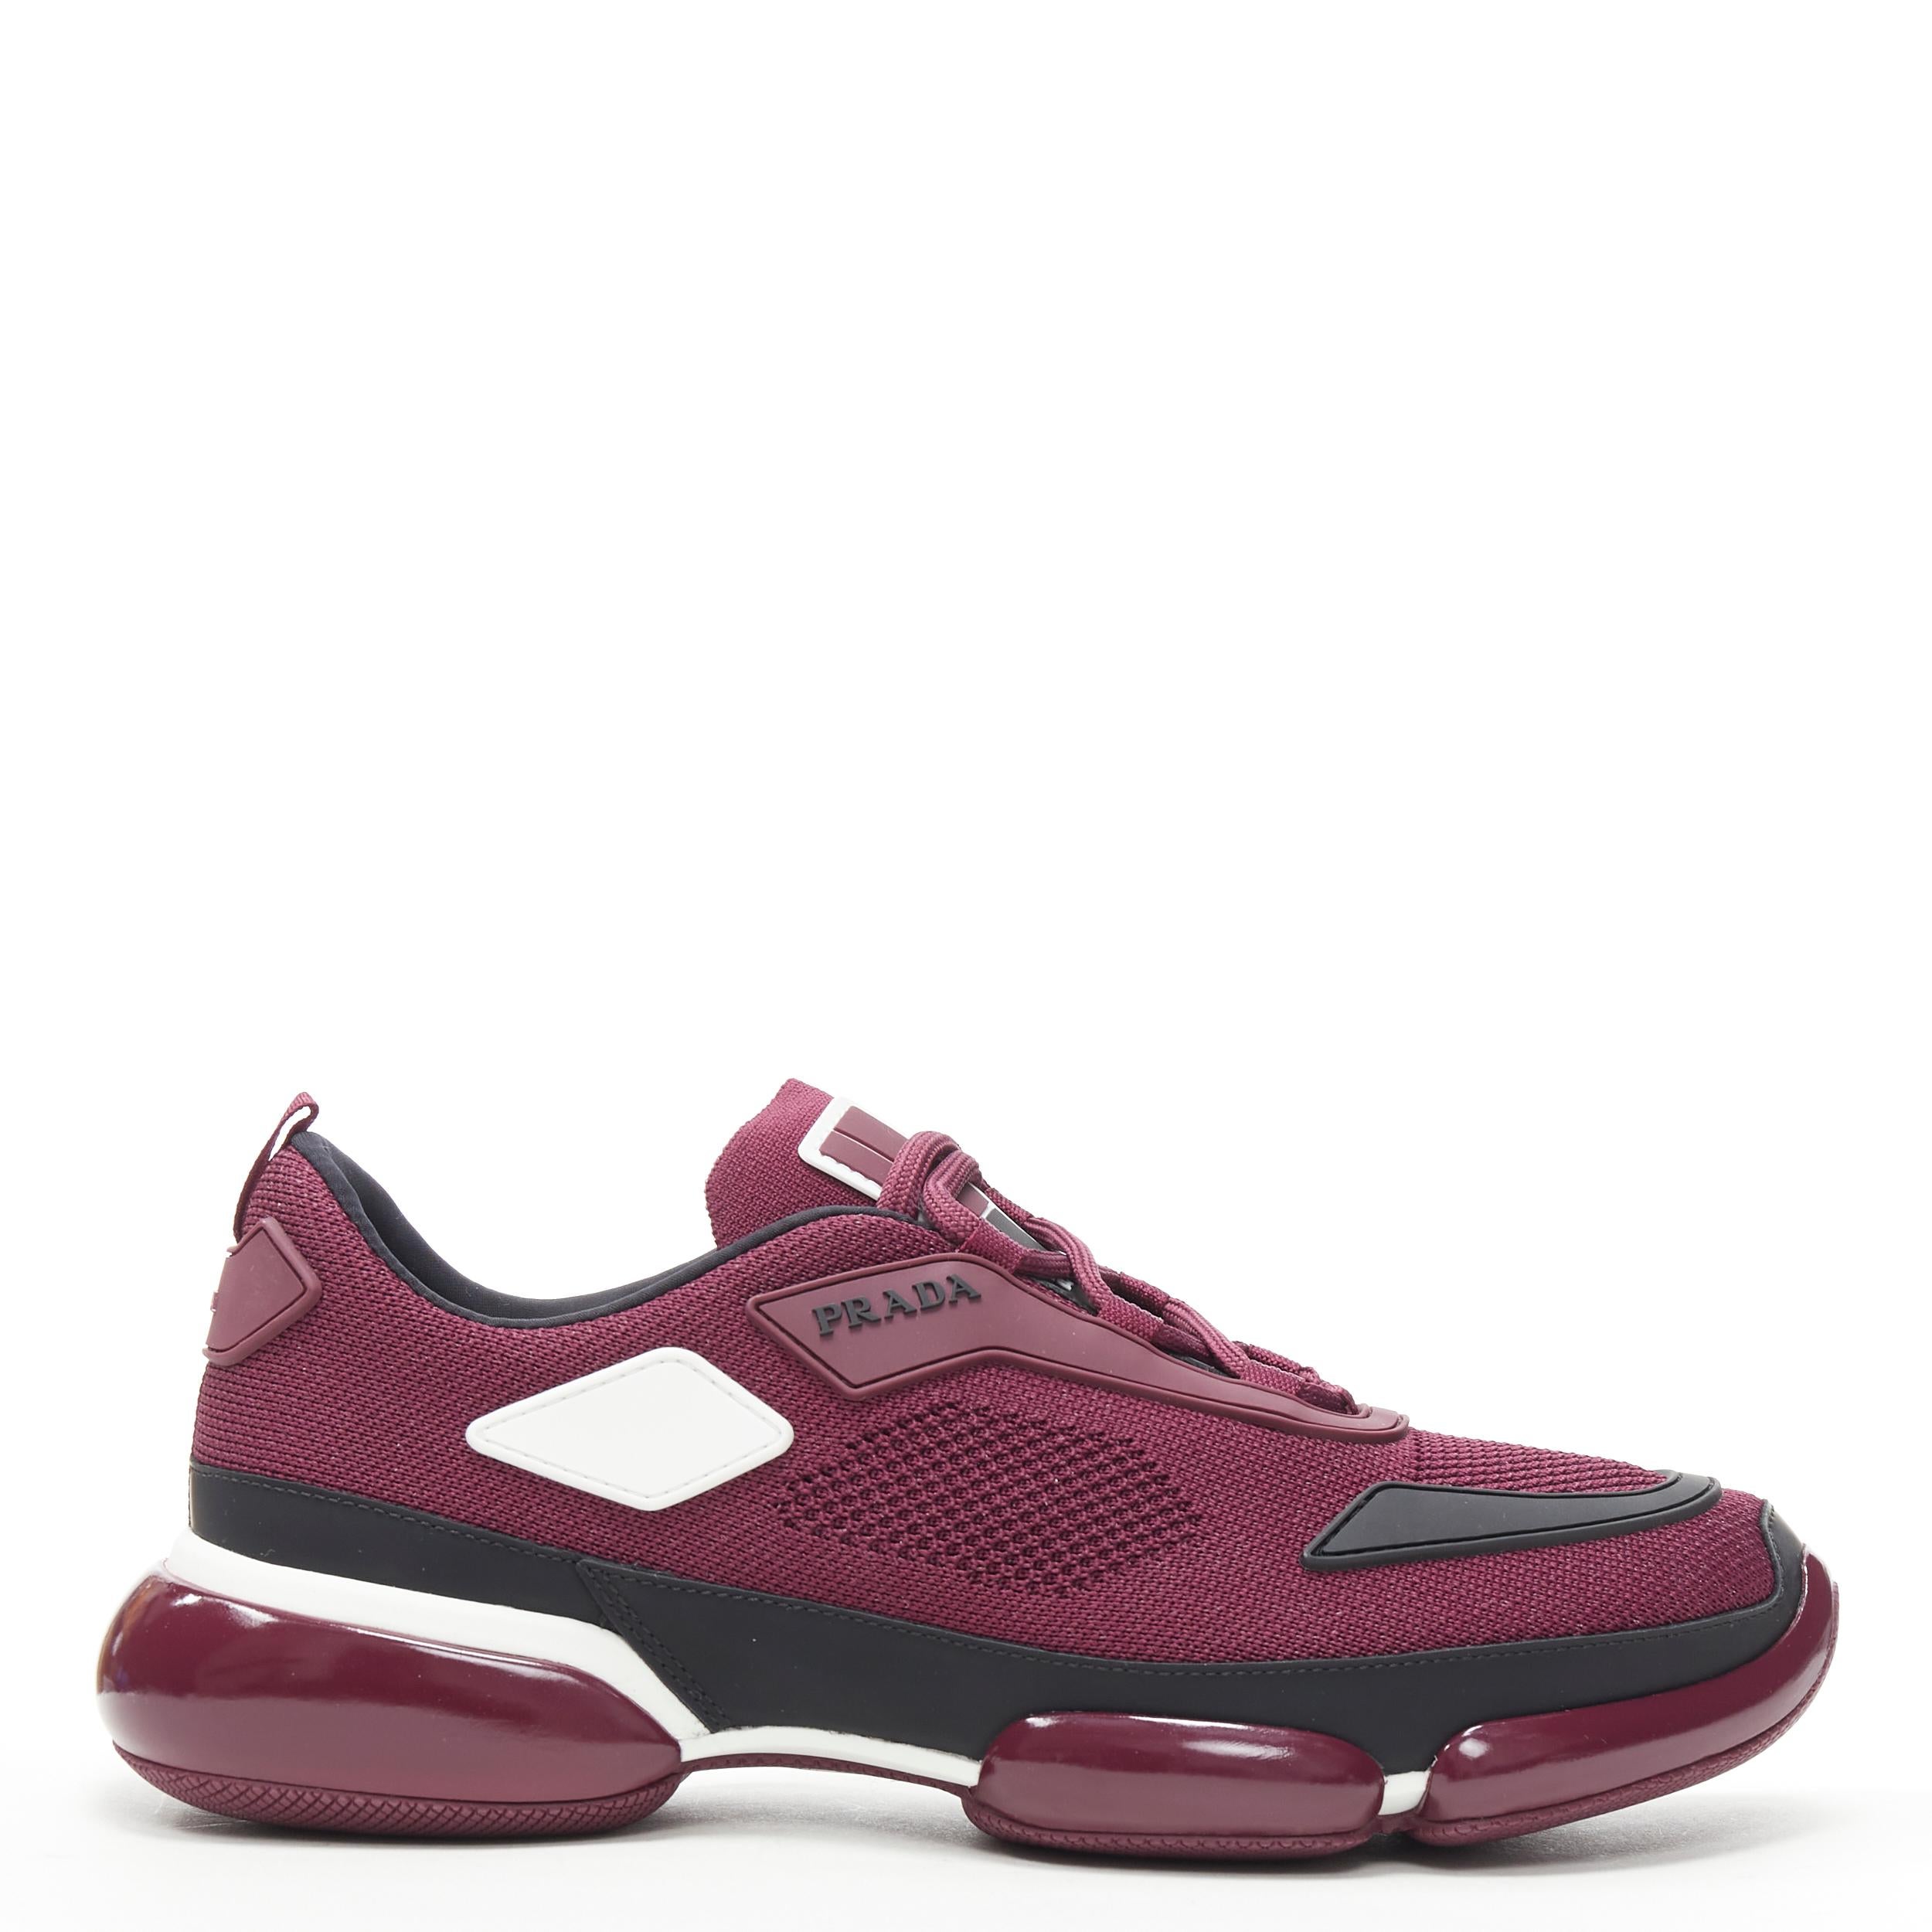 new PRADA 2018 Cloudbust burgundy red rubber logo low top sneaker UK6 EU40 US7 
Reference: TGAS/B00943 
Brand: Prada 
Designer: Miuccia Prada 
Model: Cloudbust Burgundy 
Collection: 2018 
Material: Fabric 
Color: Burgundy 
Pattern: Solid 
Closure: